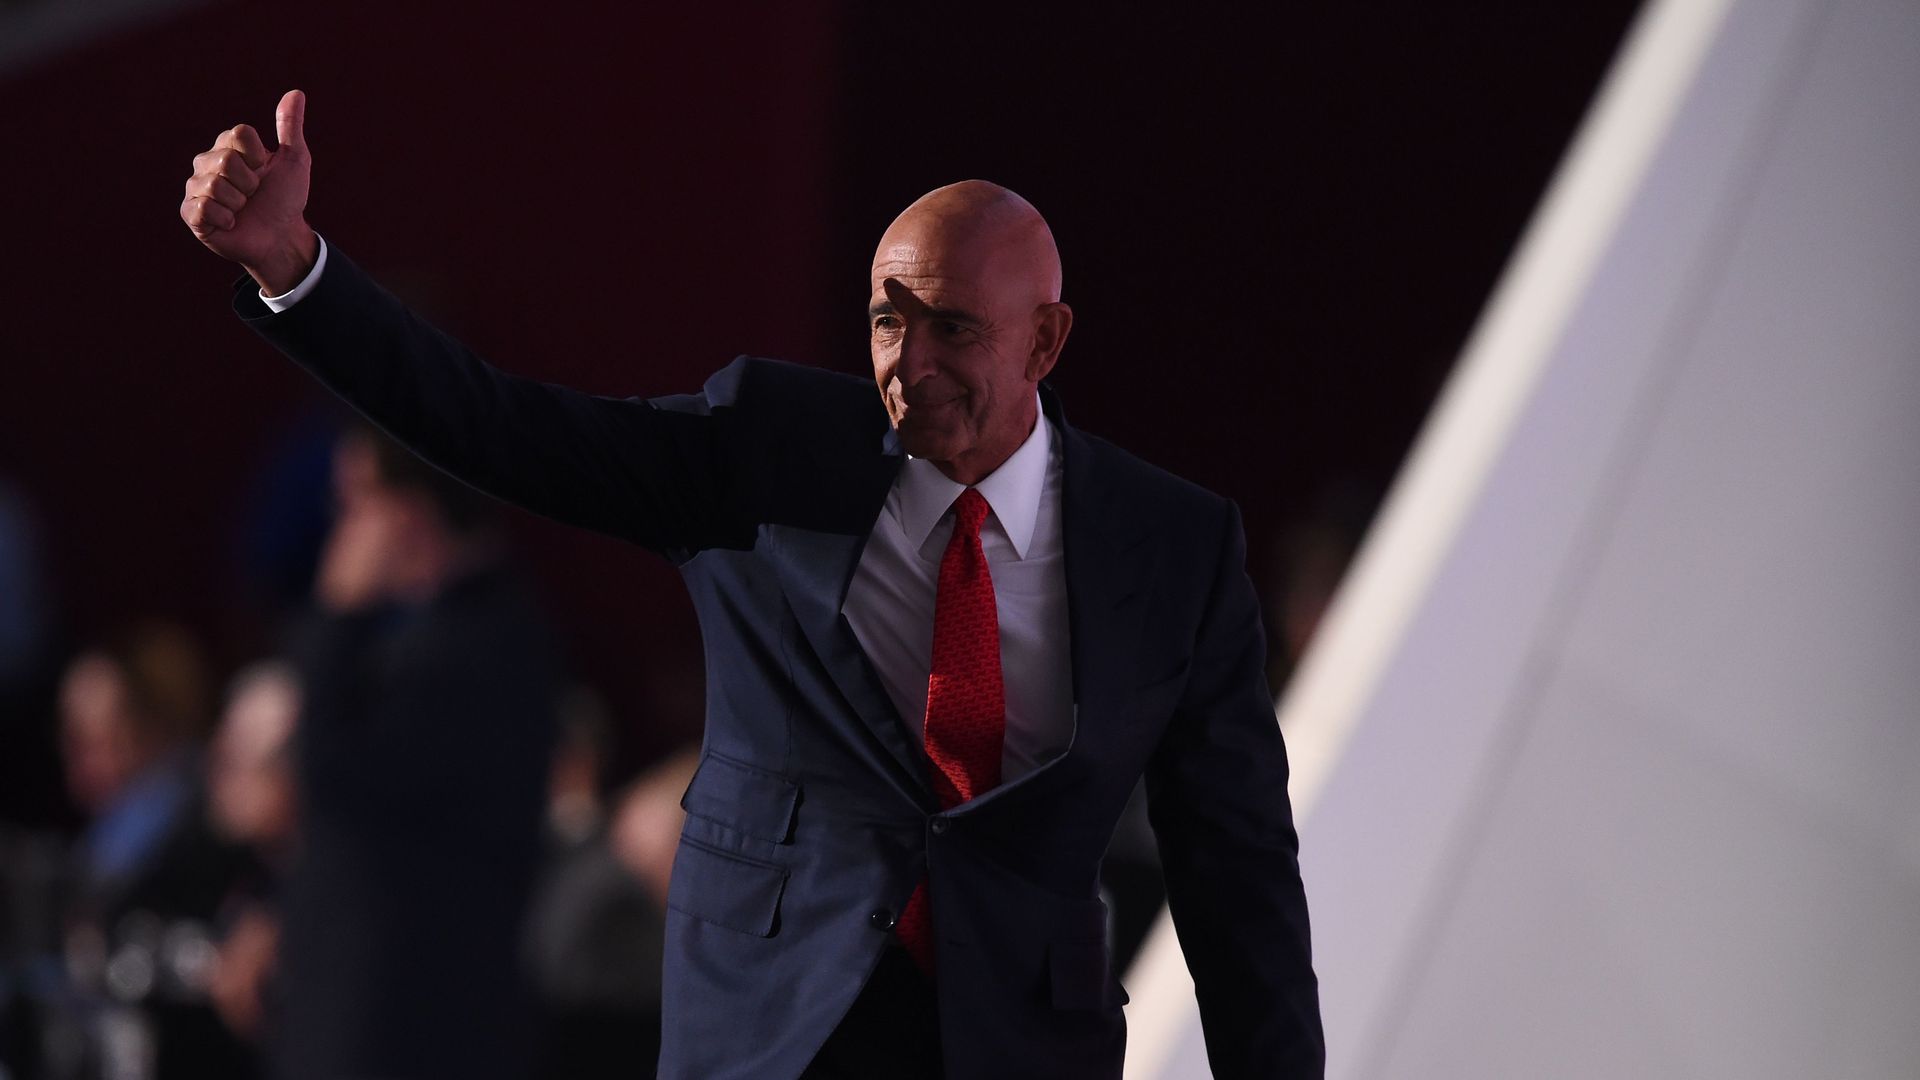 Colon Capital's Tom Barrack at the Republican National Convention in 2016.